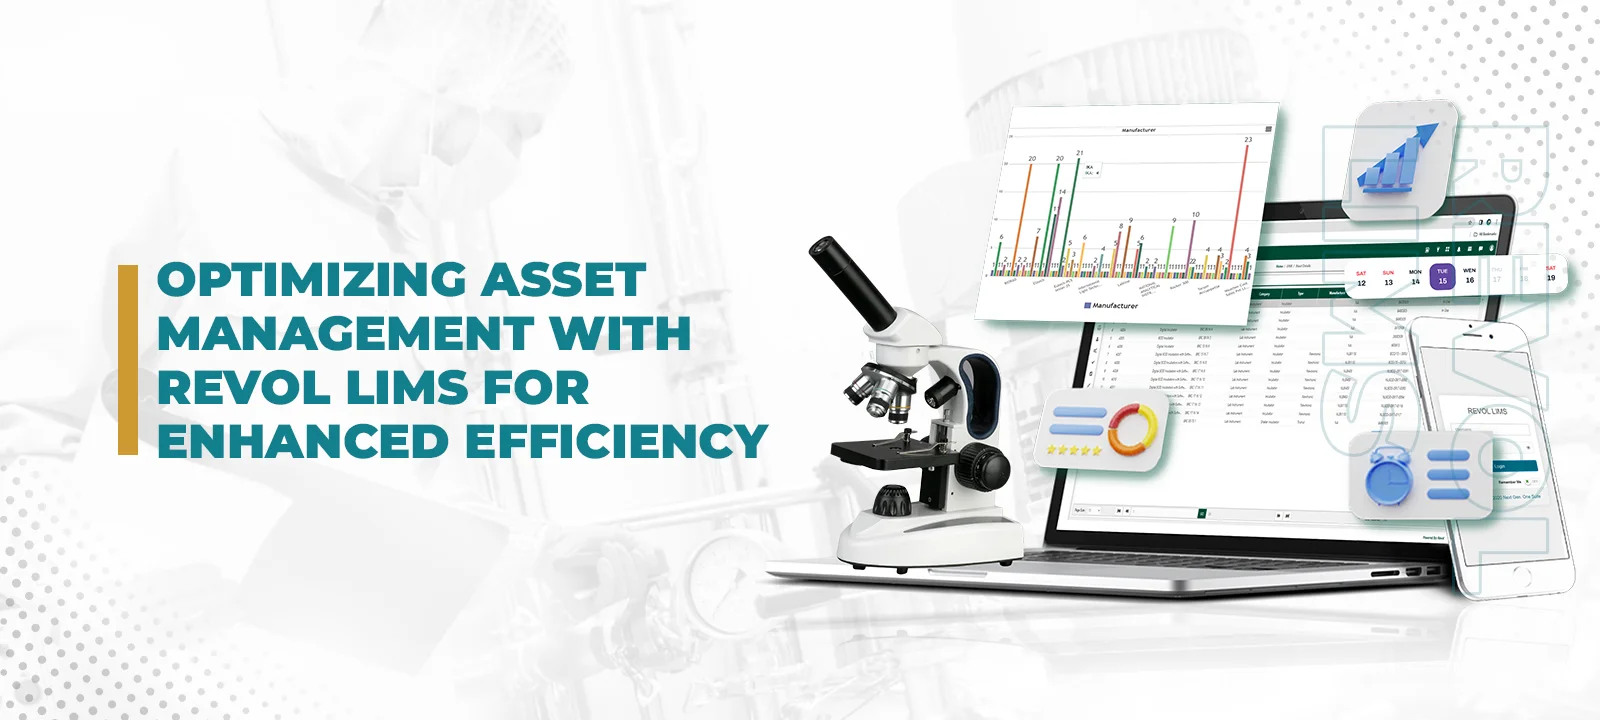 A banner with text “Optimizing Asset Management with Revol LIMS” and images of various assets and data used in laboratory management.